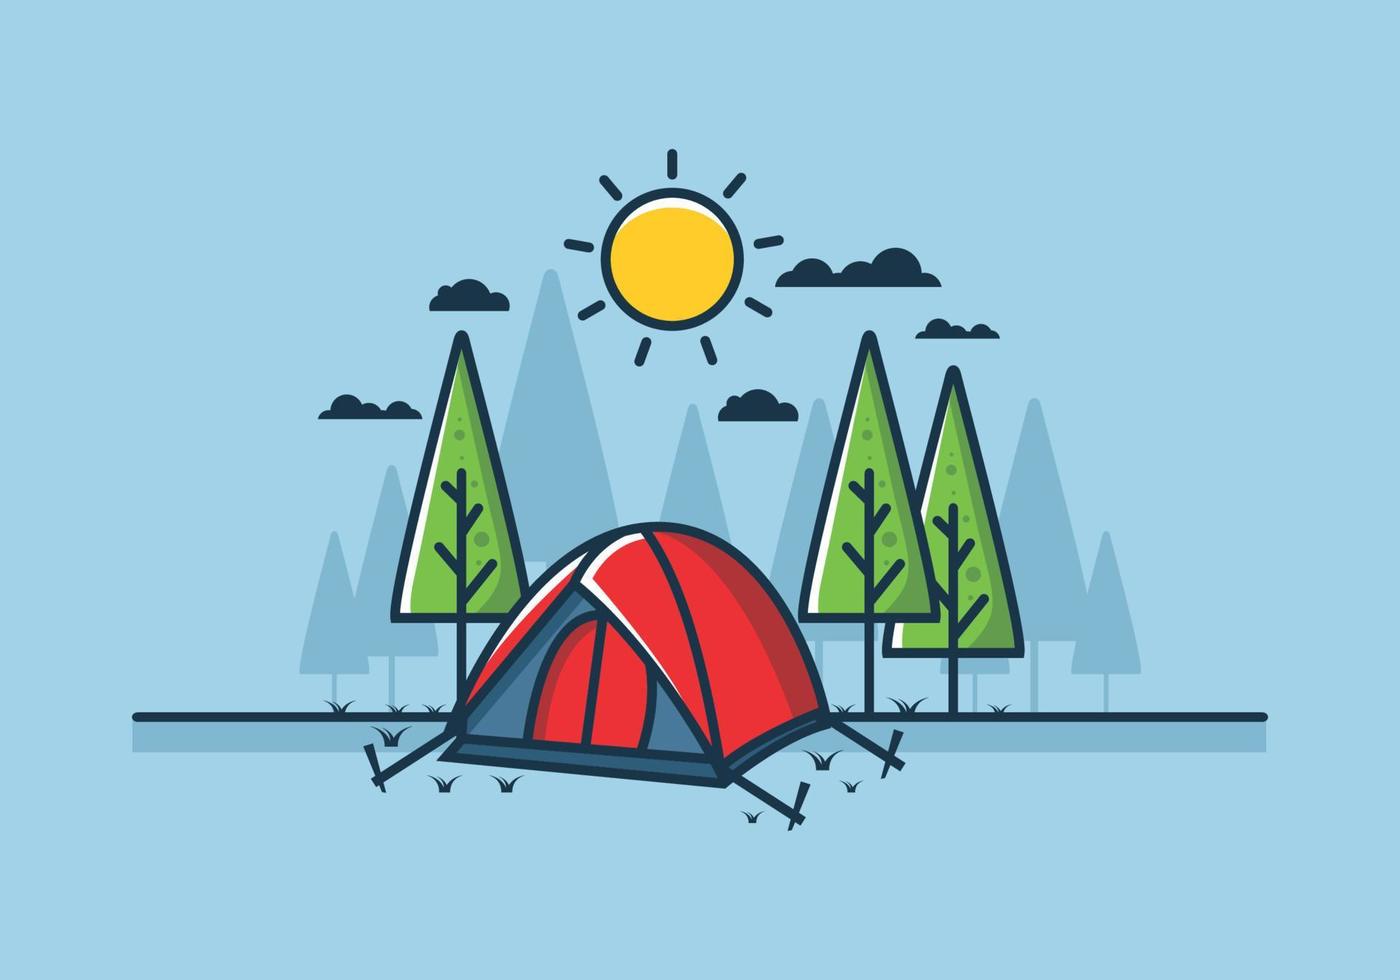 Fun camping with dome tent flat illustration vector